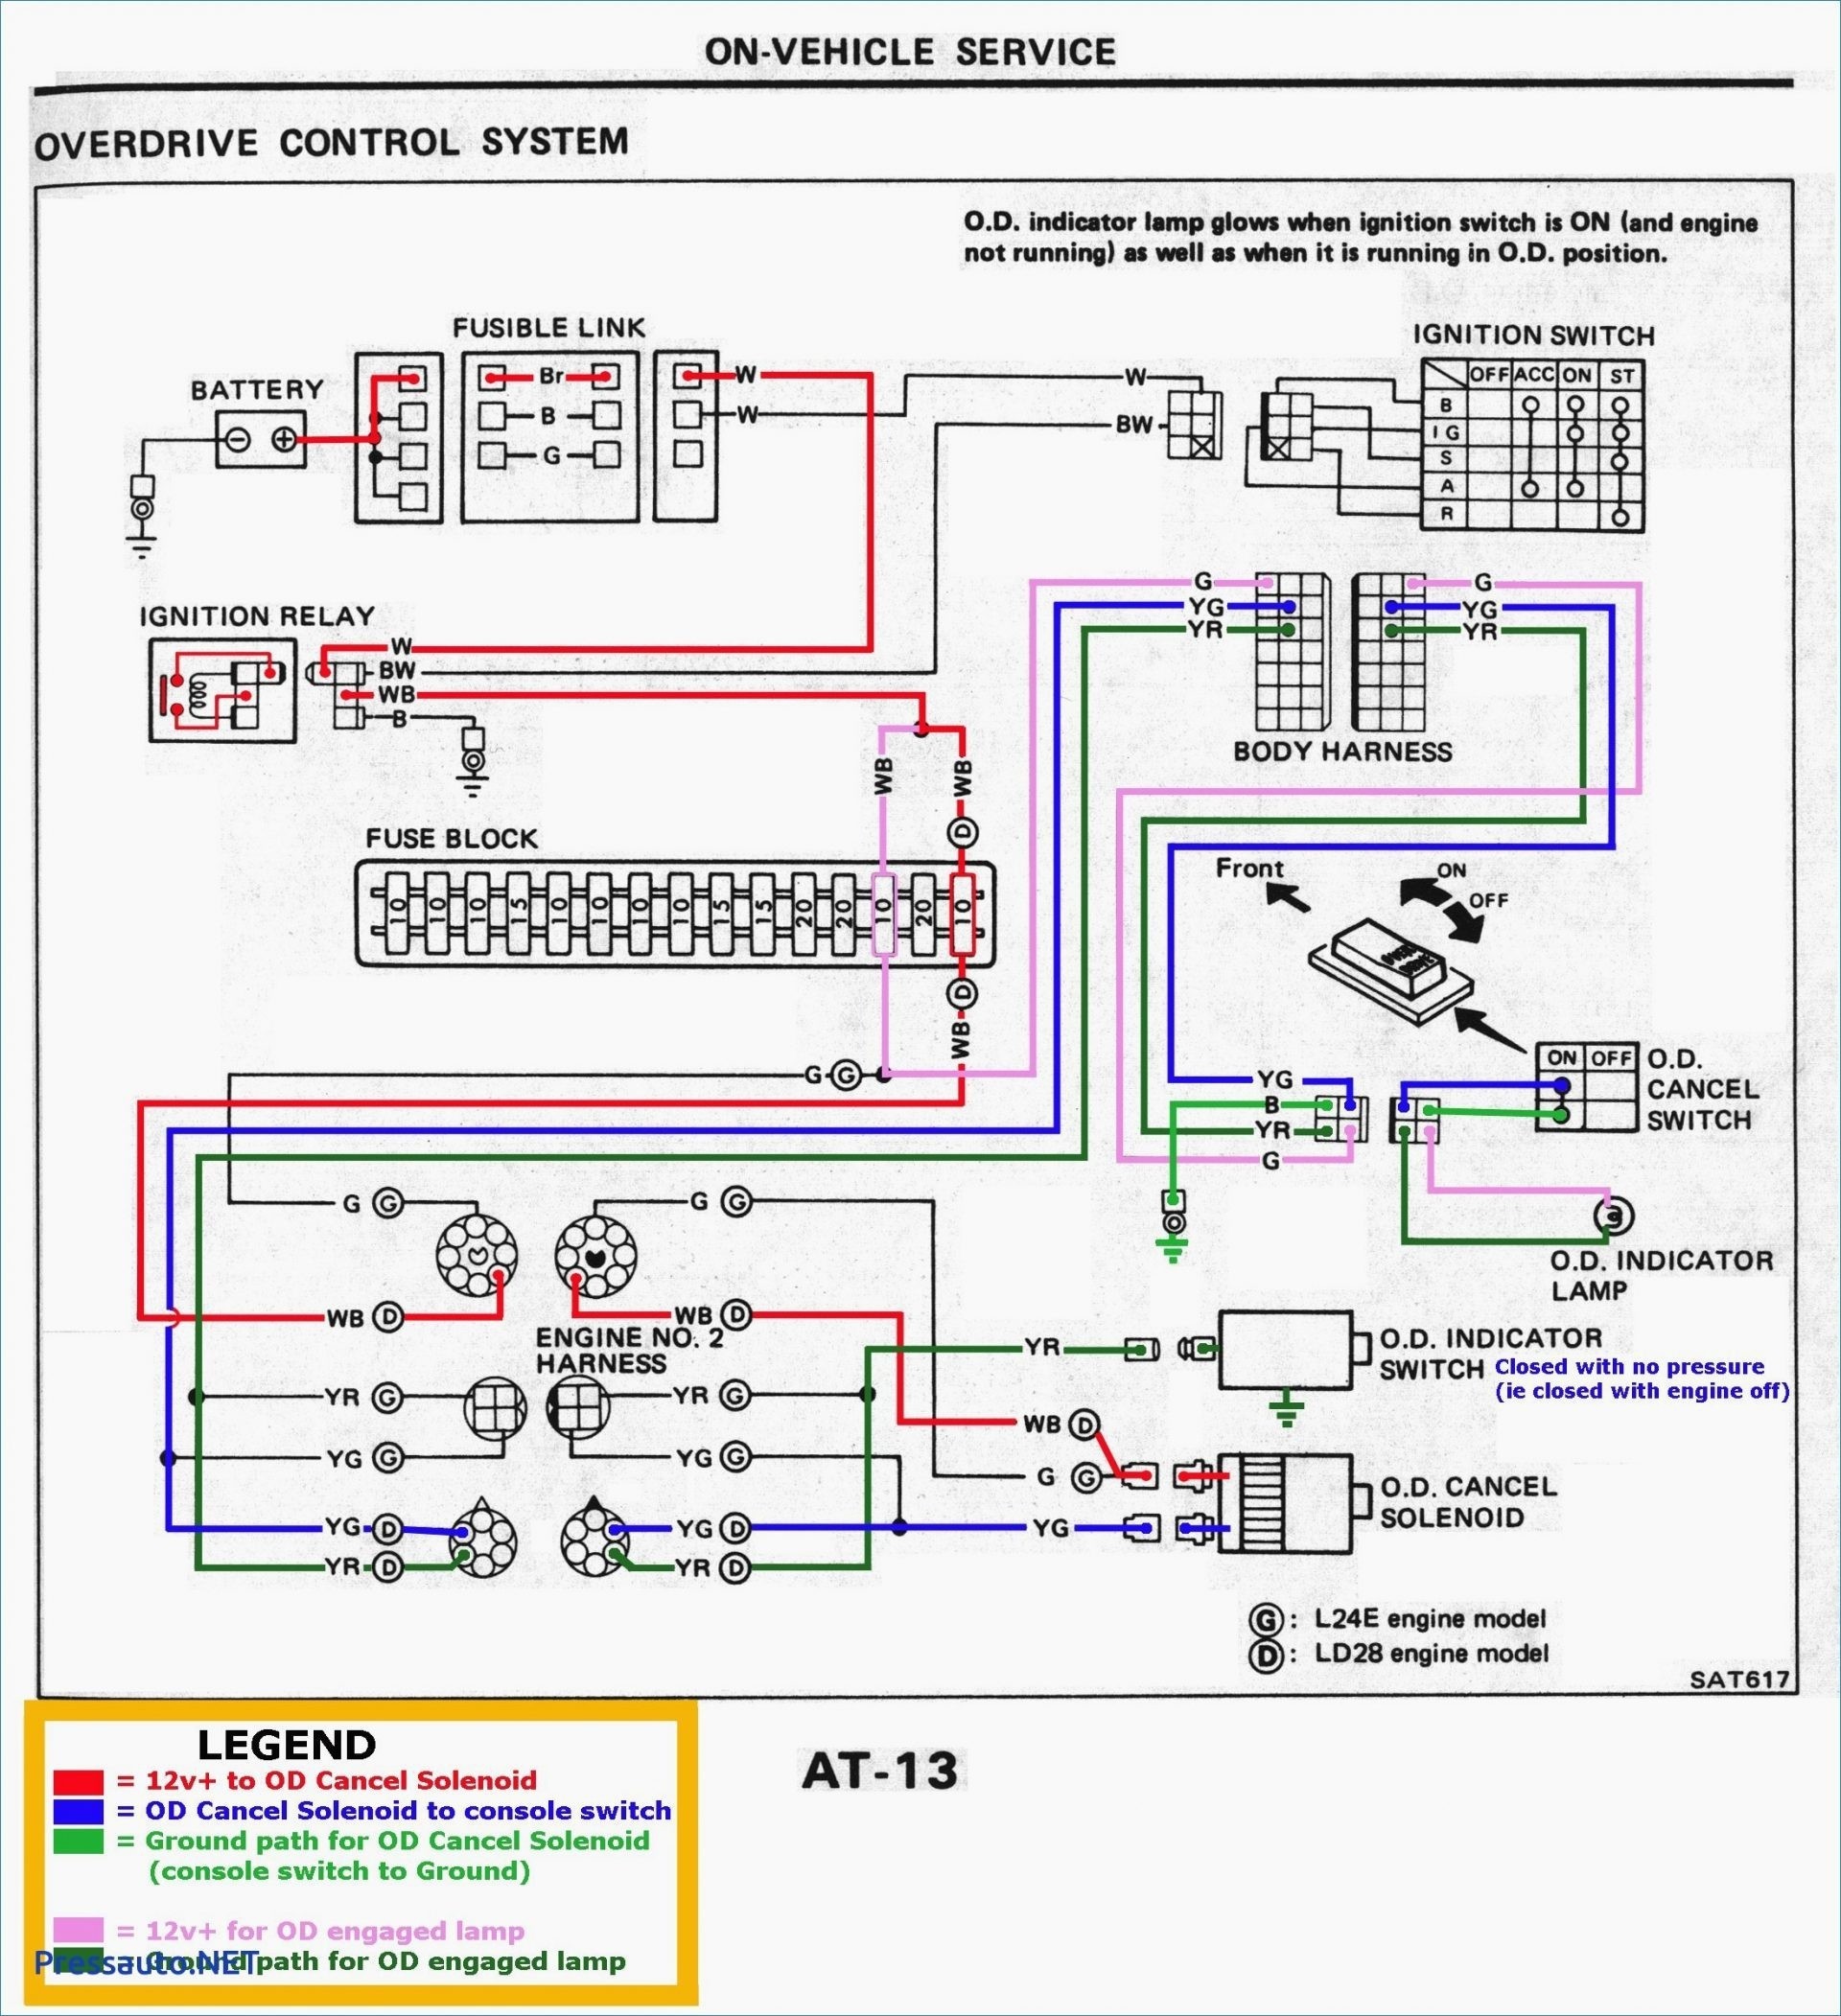 Wiring Diagram for Spotlights with A Relay New Led Tail Lights Humbucker Wiring Diagram Collection